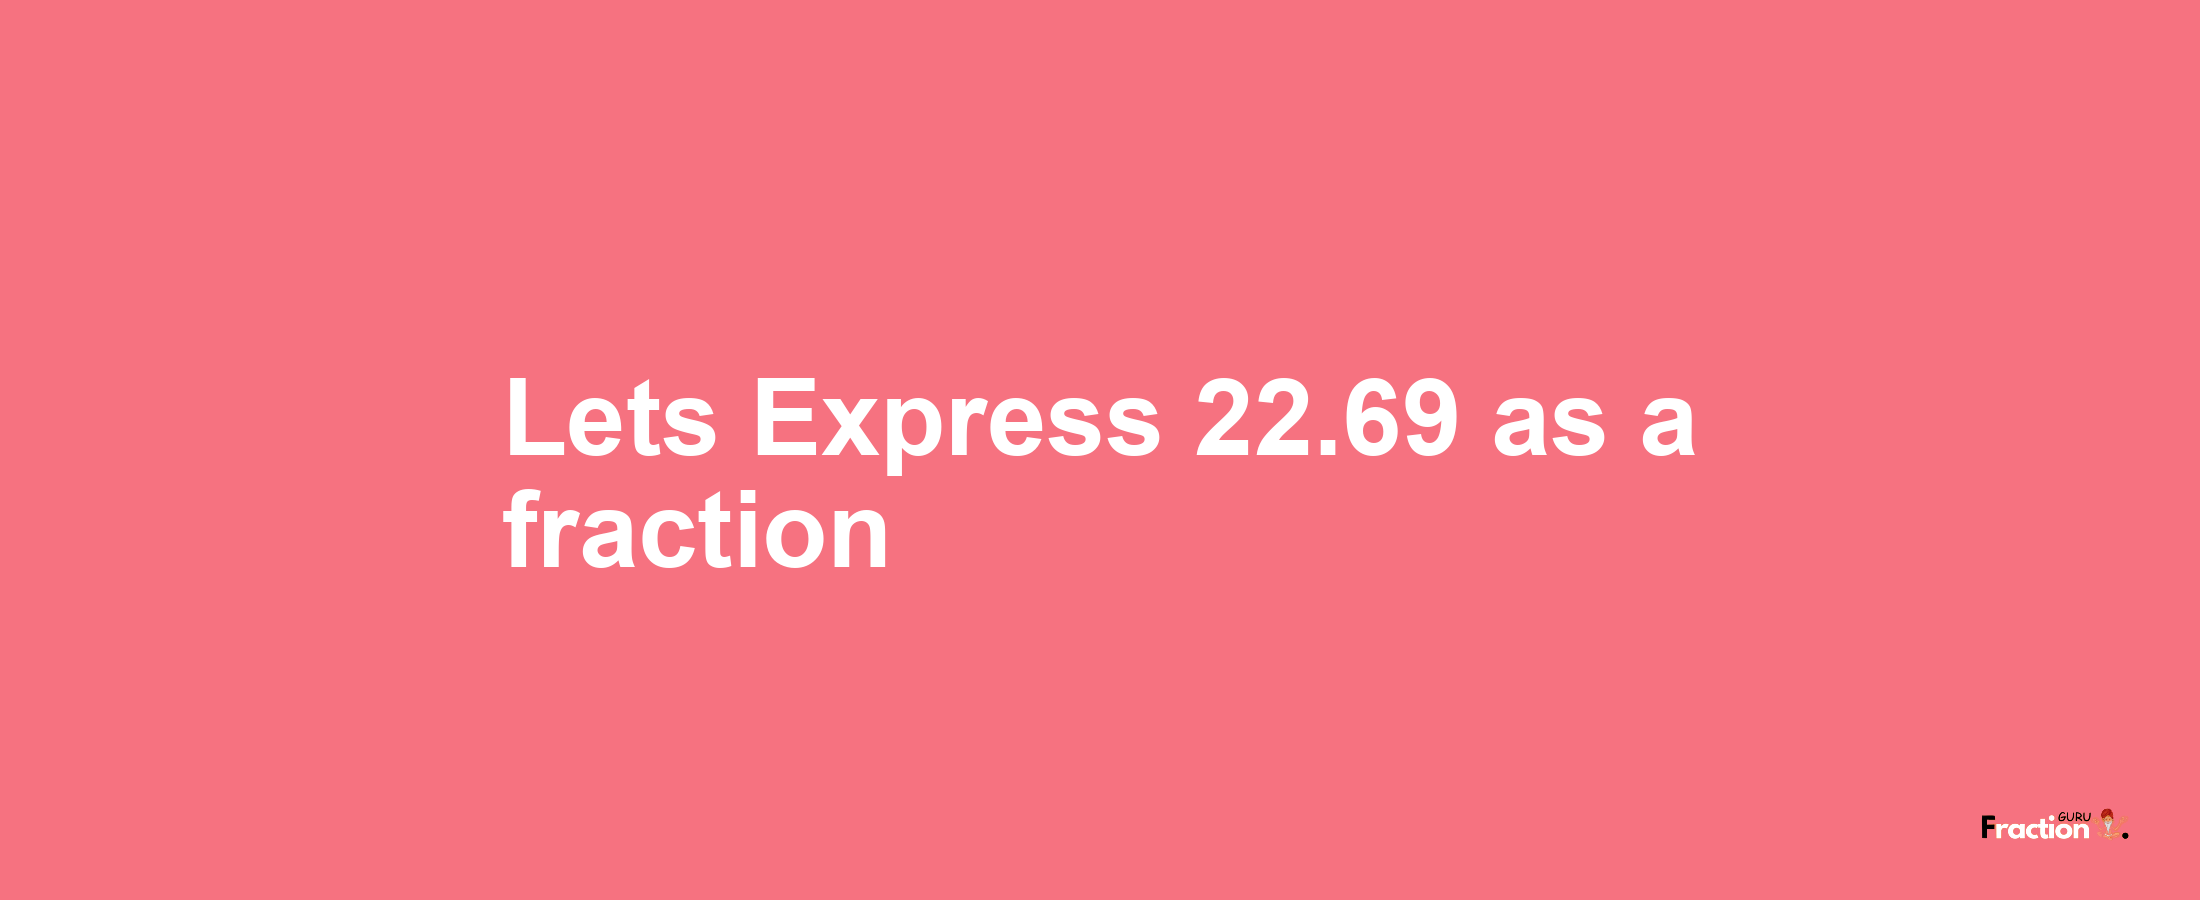 Lets Express 22.69 as afraction